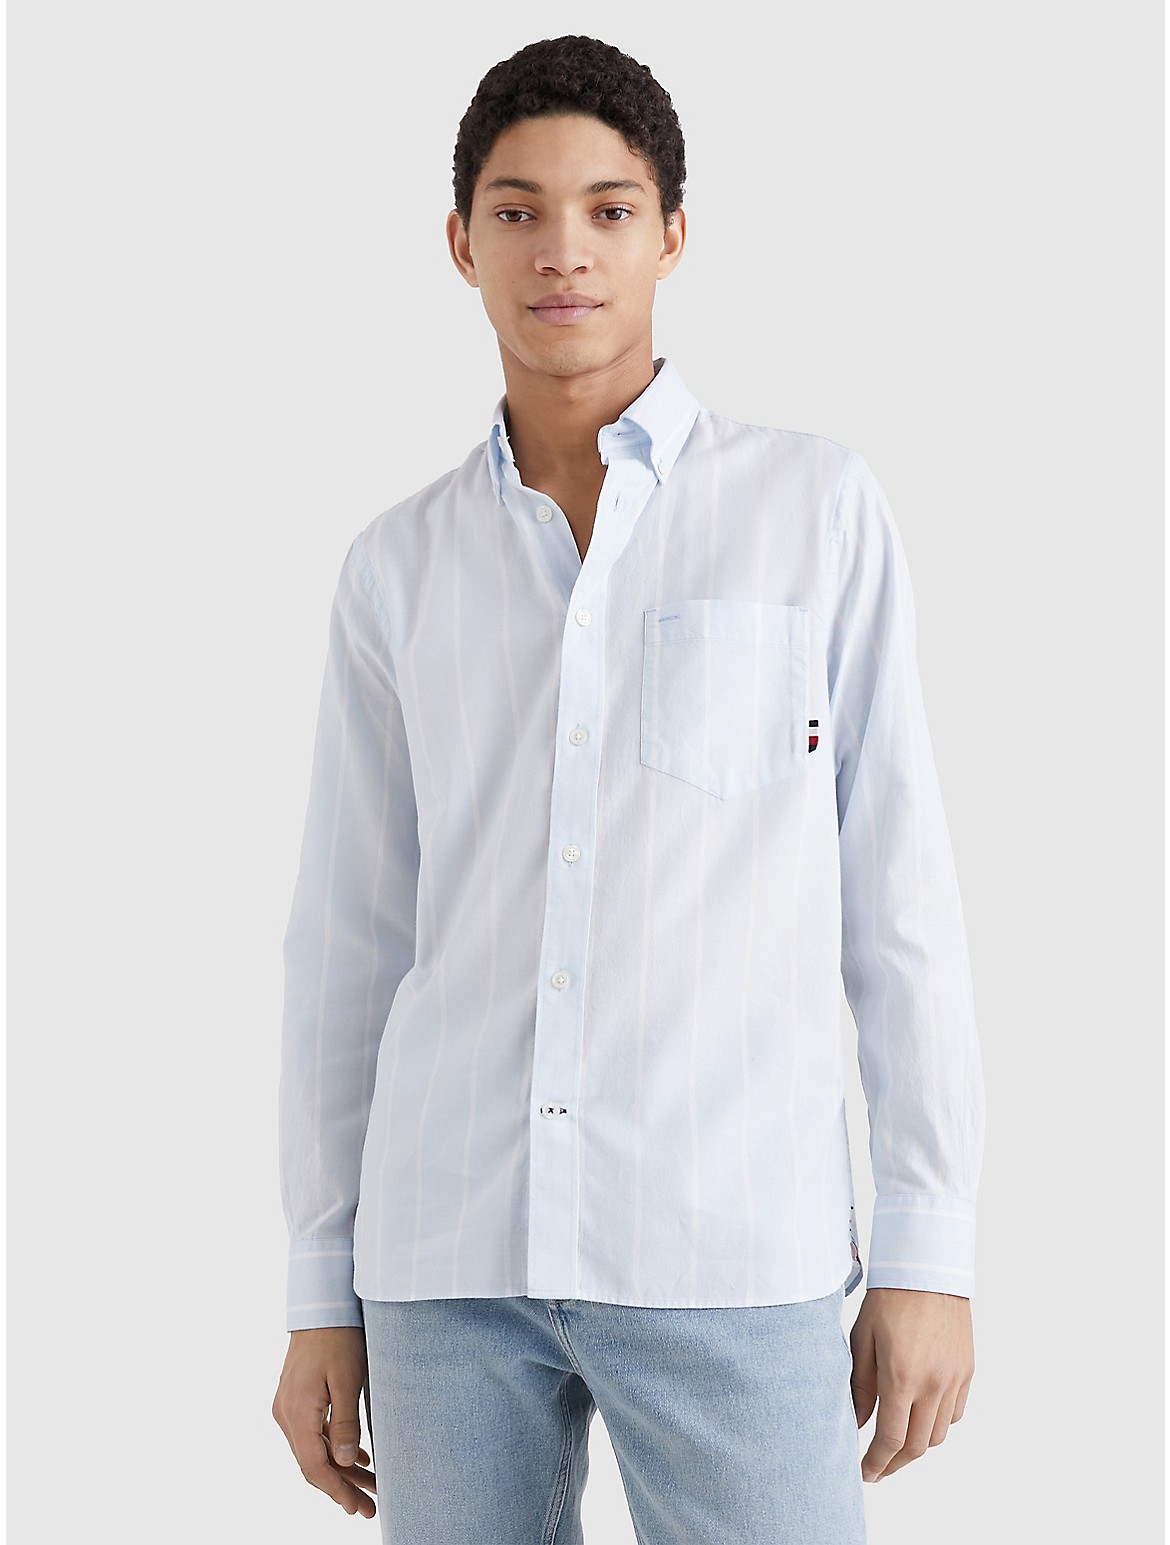 Regular Blue White Hilfiger Oxford Breezy Optic / Shirt In ModeSens | Striped Tommy Fit